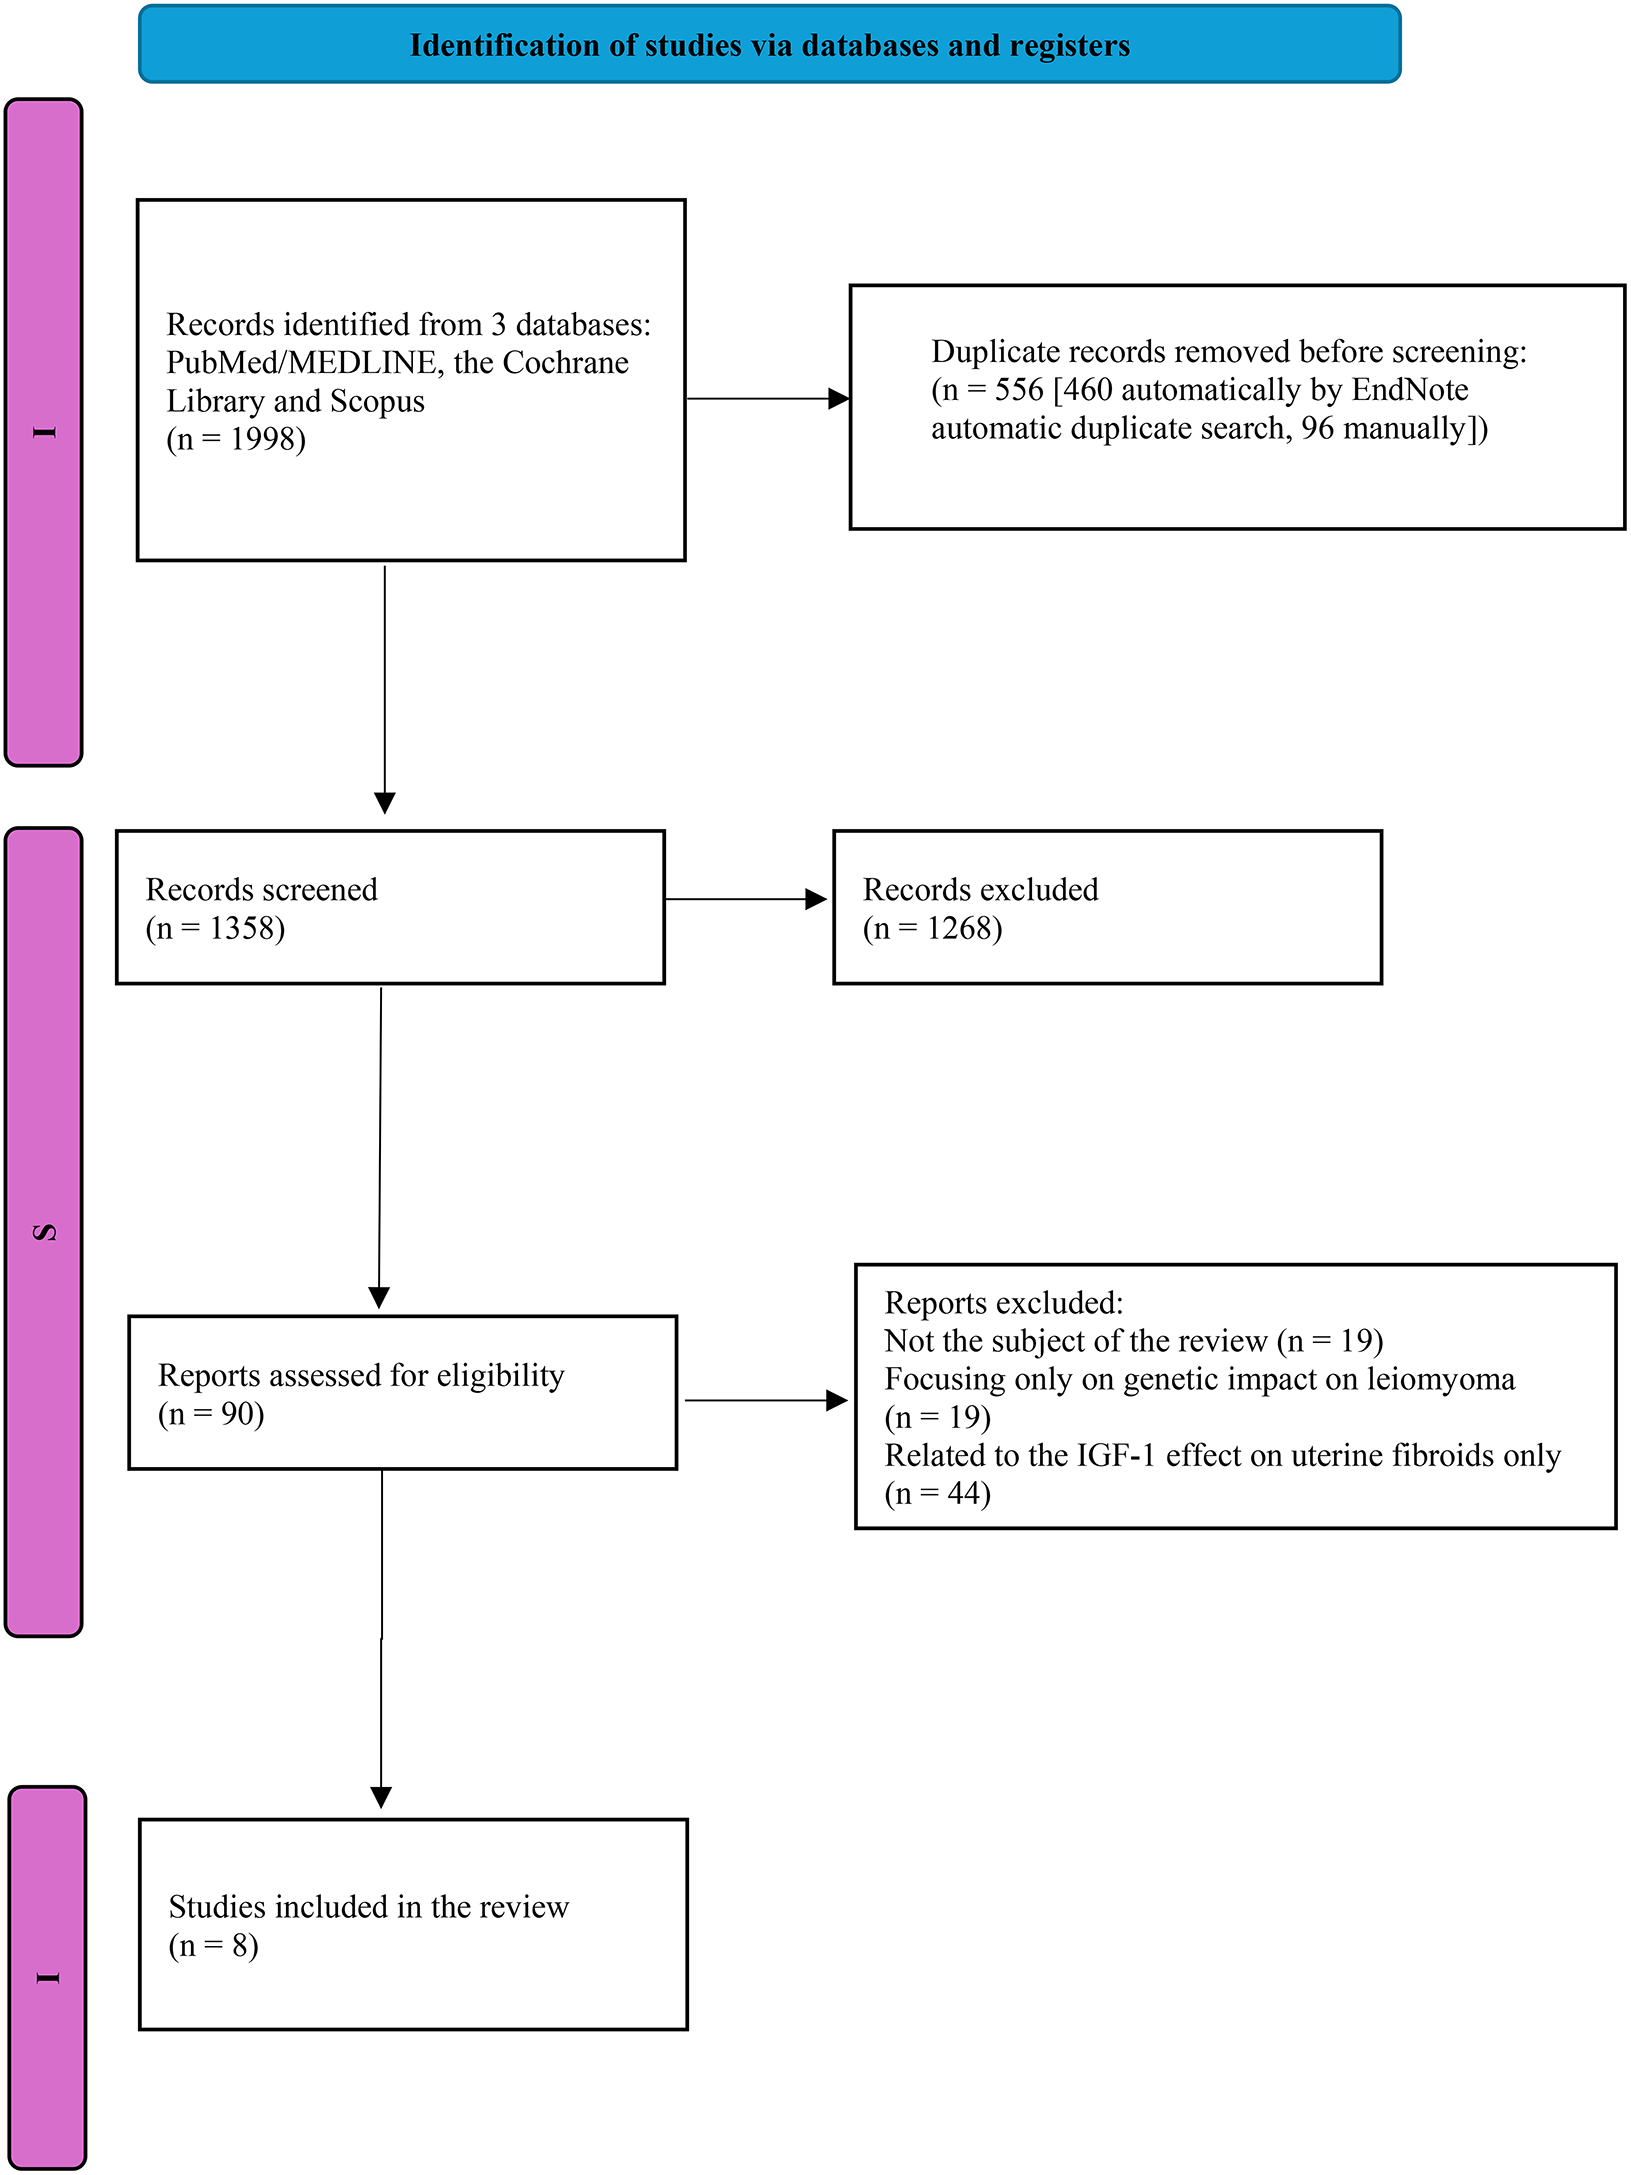 Uterine fibroids in women diagnosed with acromegaly: a systematic review